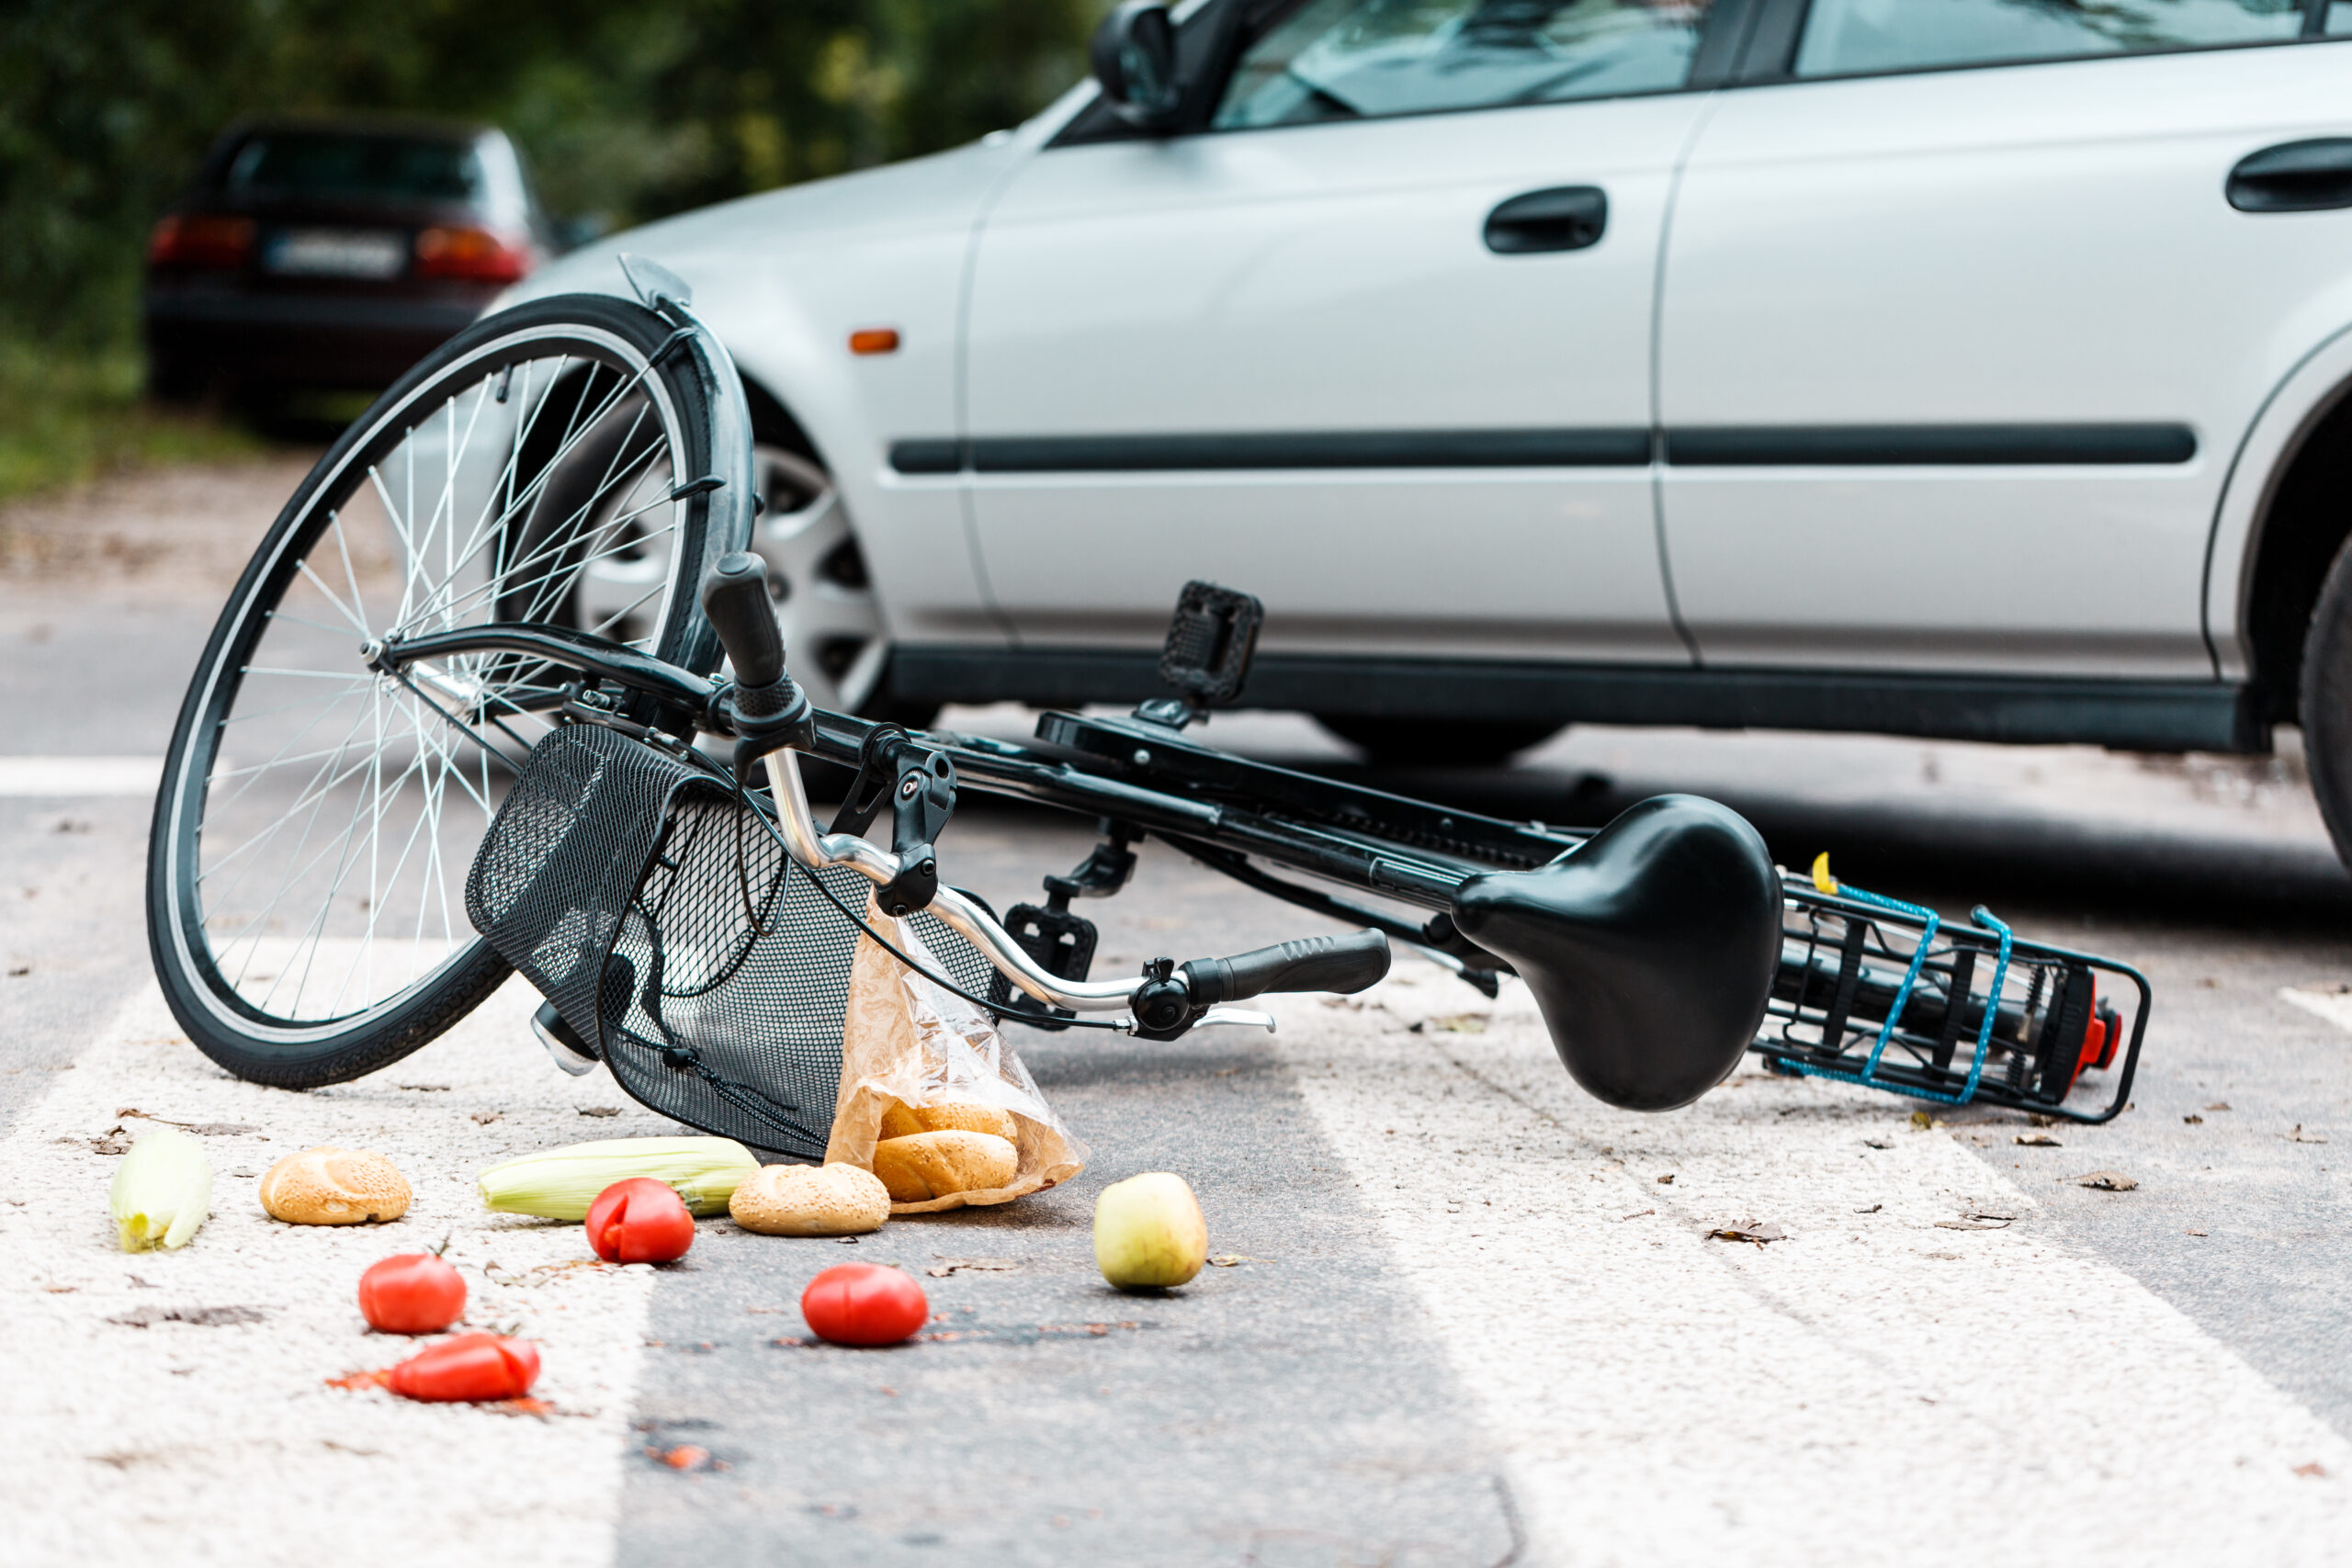 Determining Fault in Indiana Bike Accidents: Key Factors to Consider